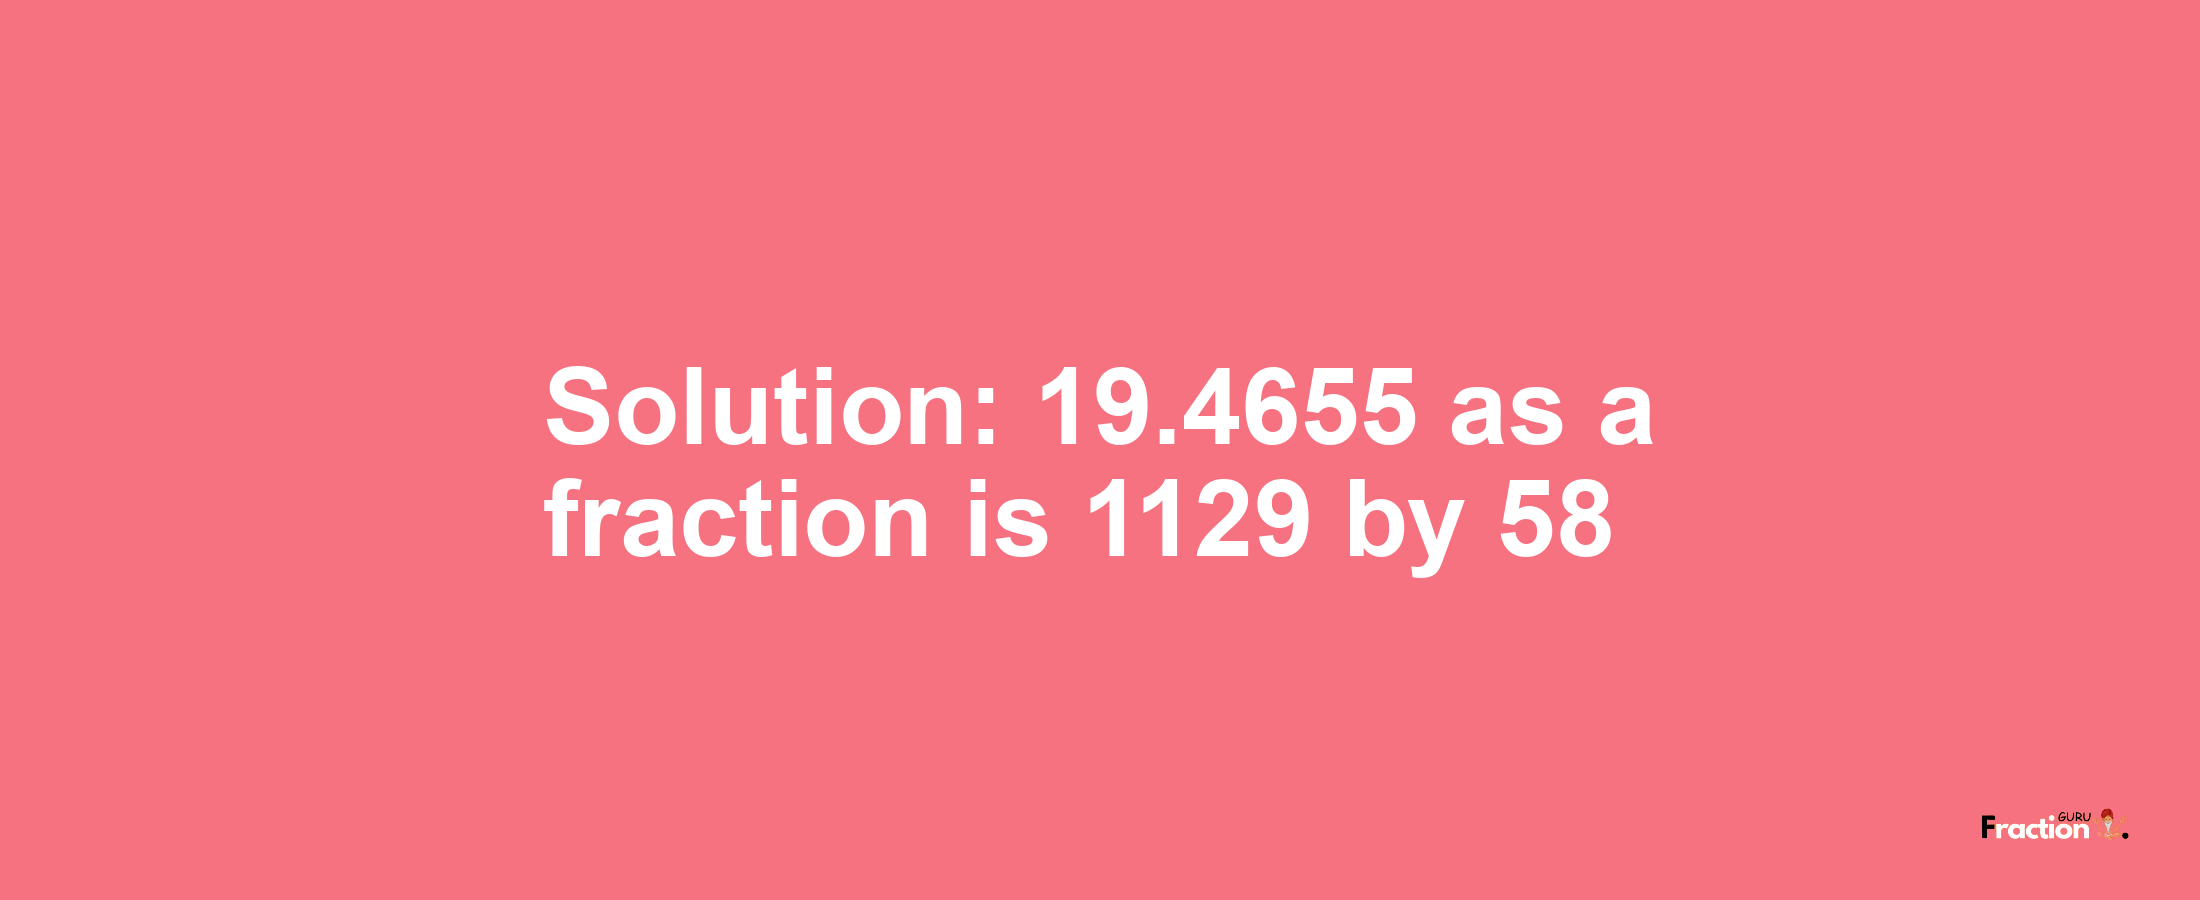 Solution:19.4655 as a fraction is 1129/58